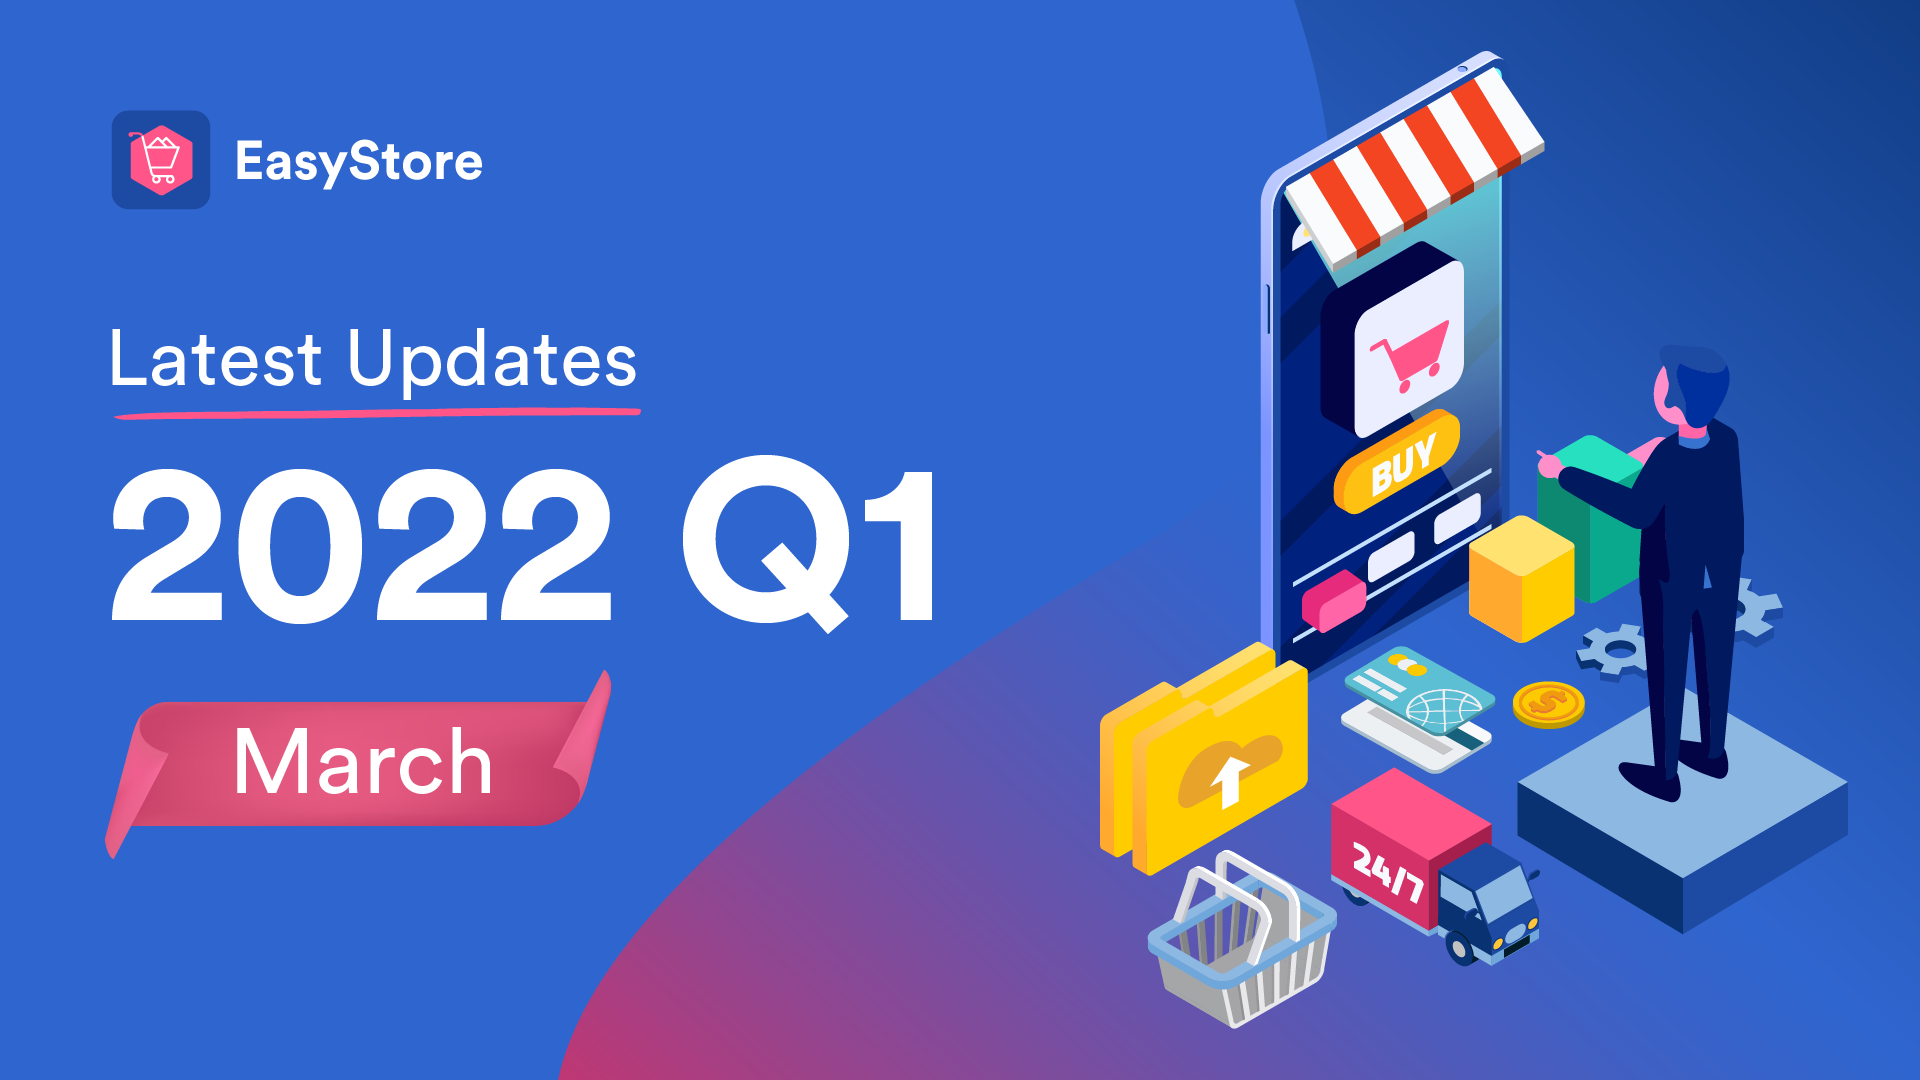 EasyStore Latest Updates: March 2022 | EasyStore